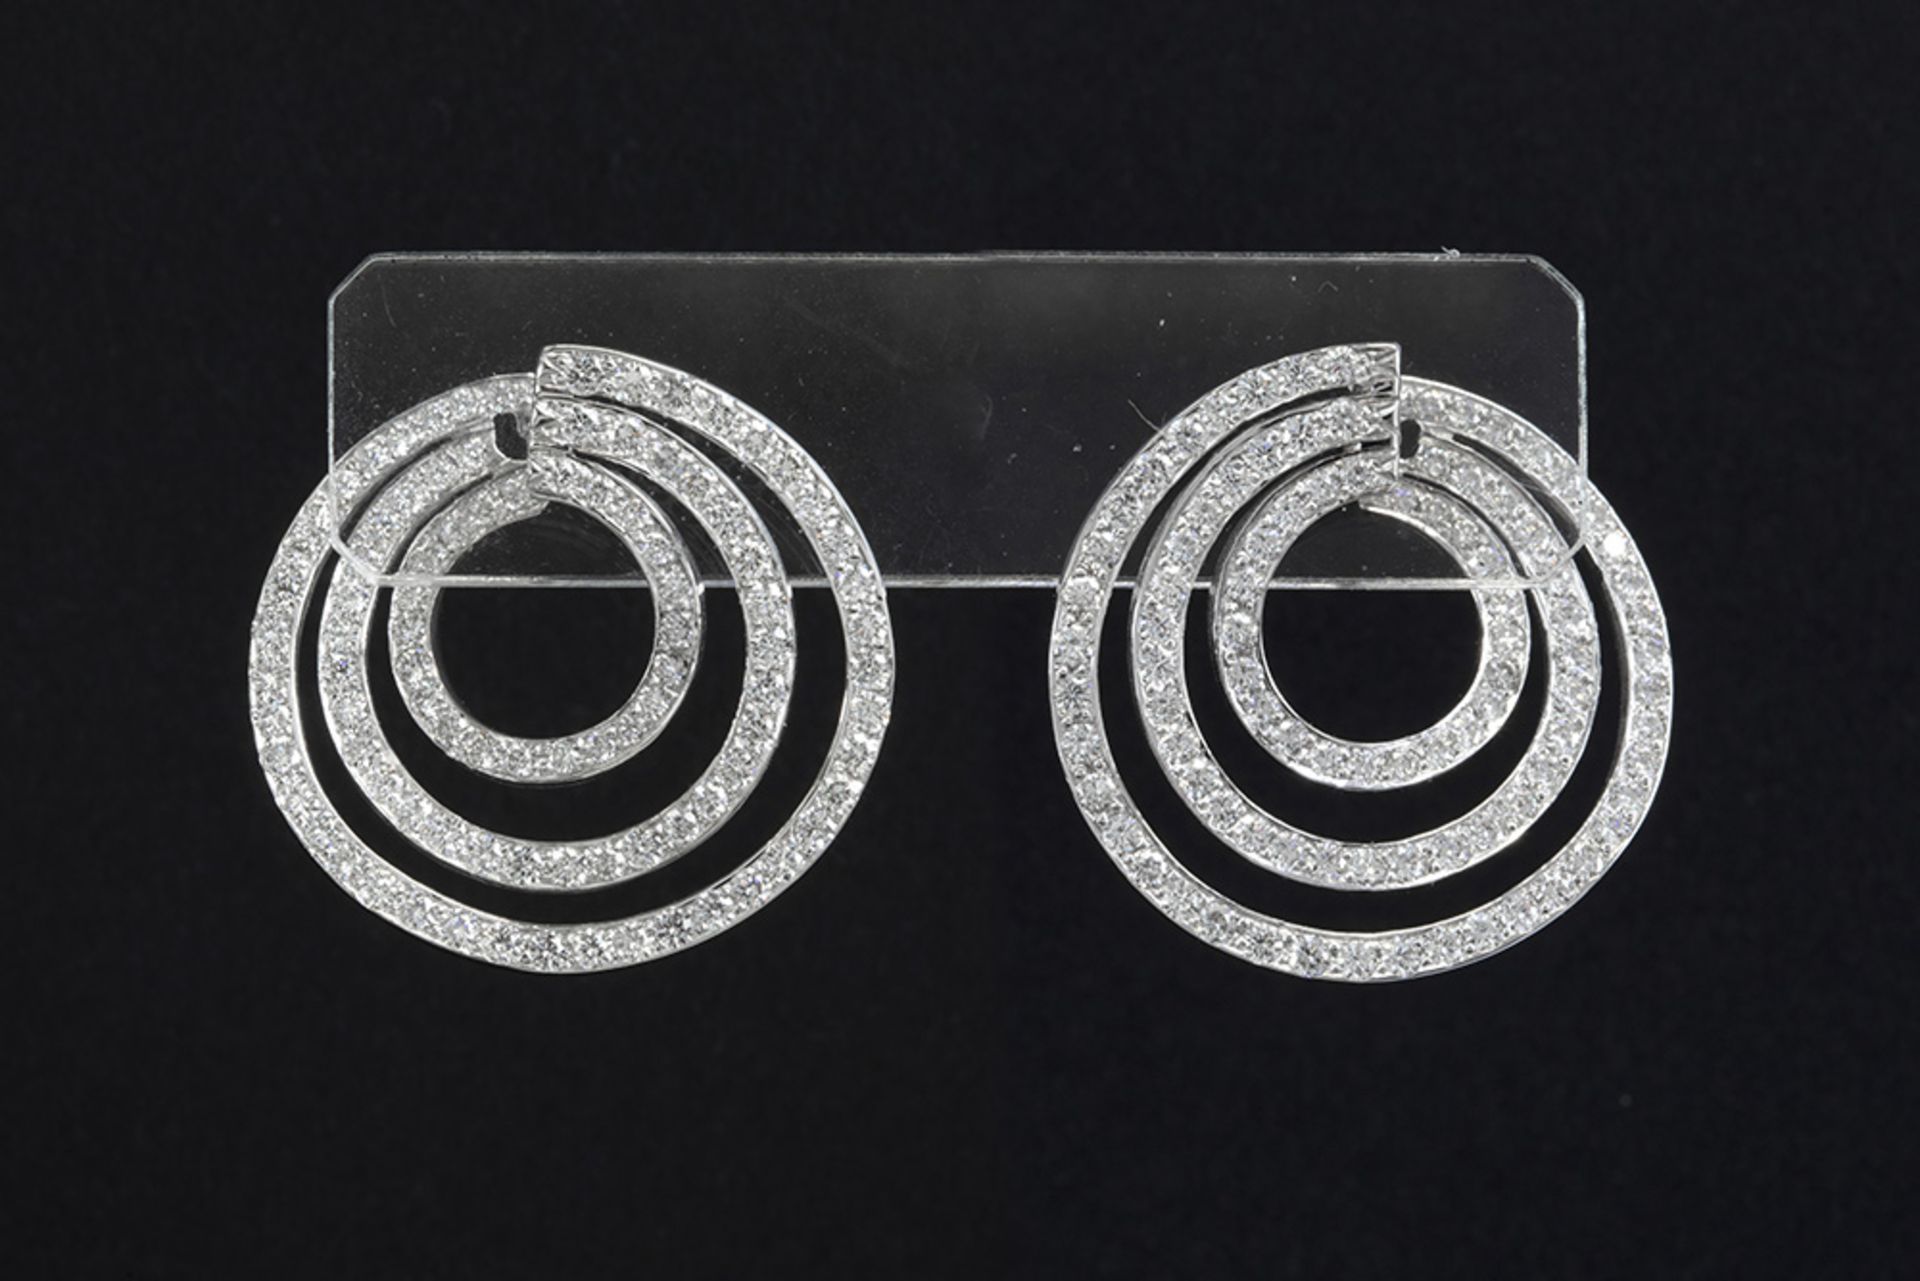 pair of earrings in white gold (18 carat) with ca 4,30 carat of high quality brilliant cut